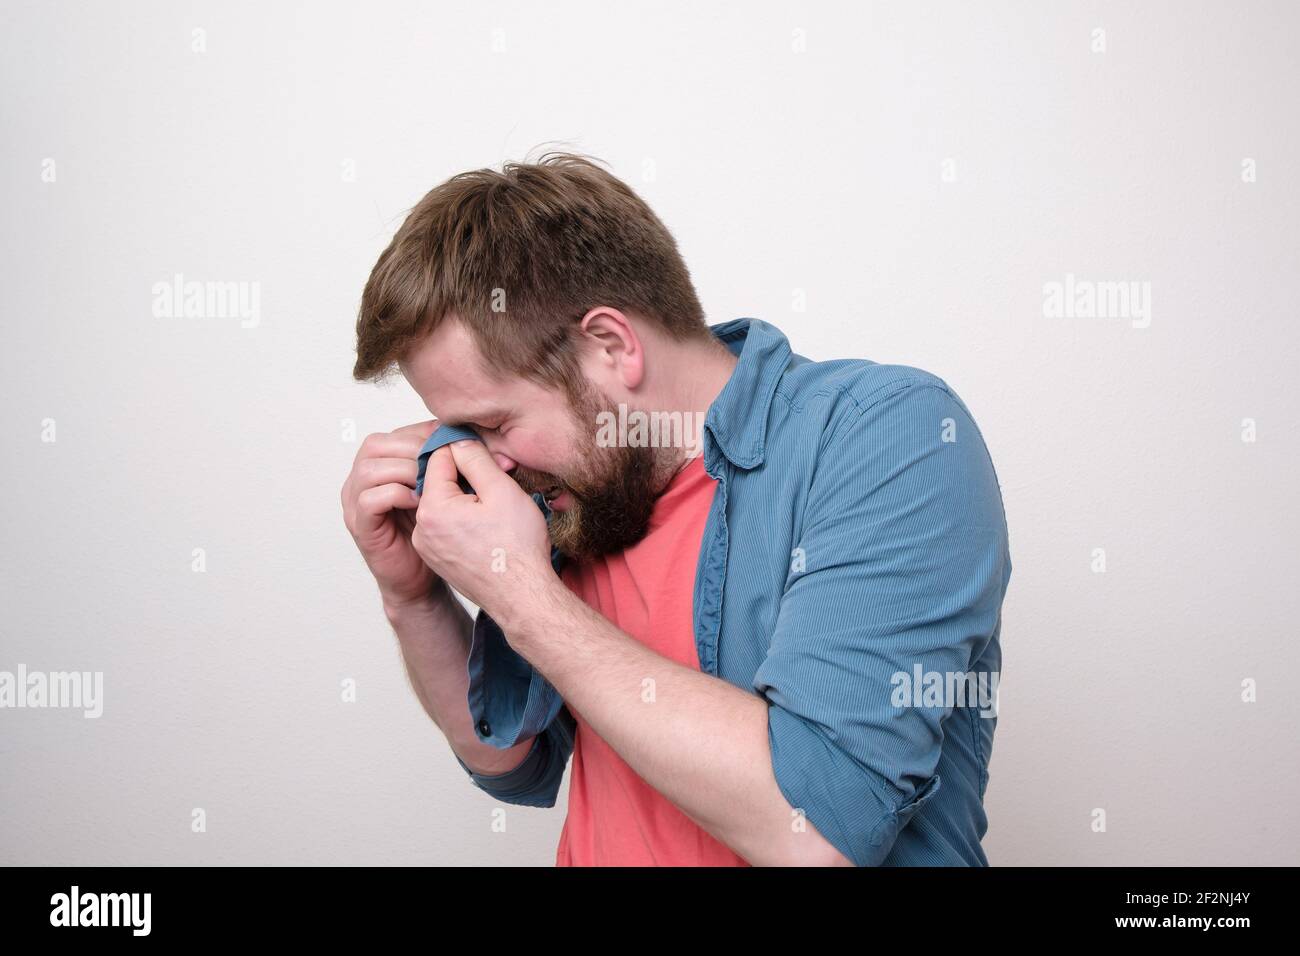 Caucasian bearded man is very upset, he sobbing and wipes away tears with his shirt. White background. Stock Photo